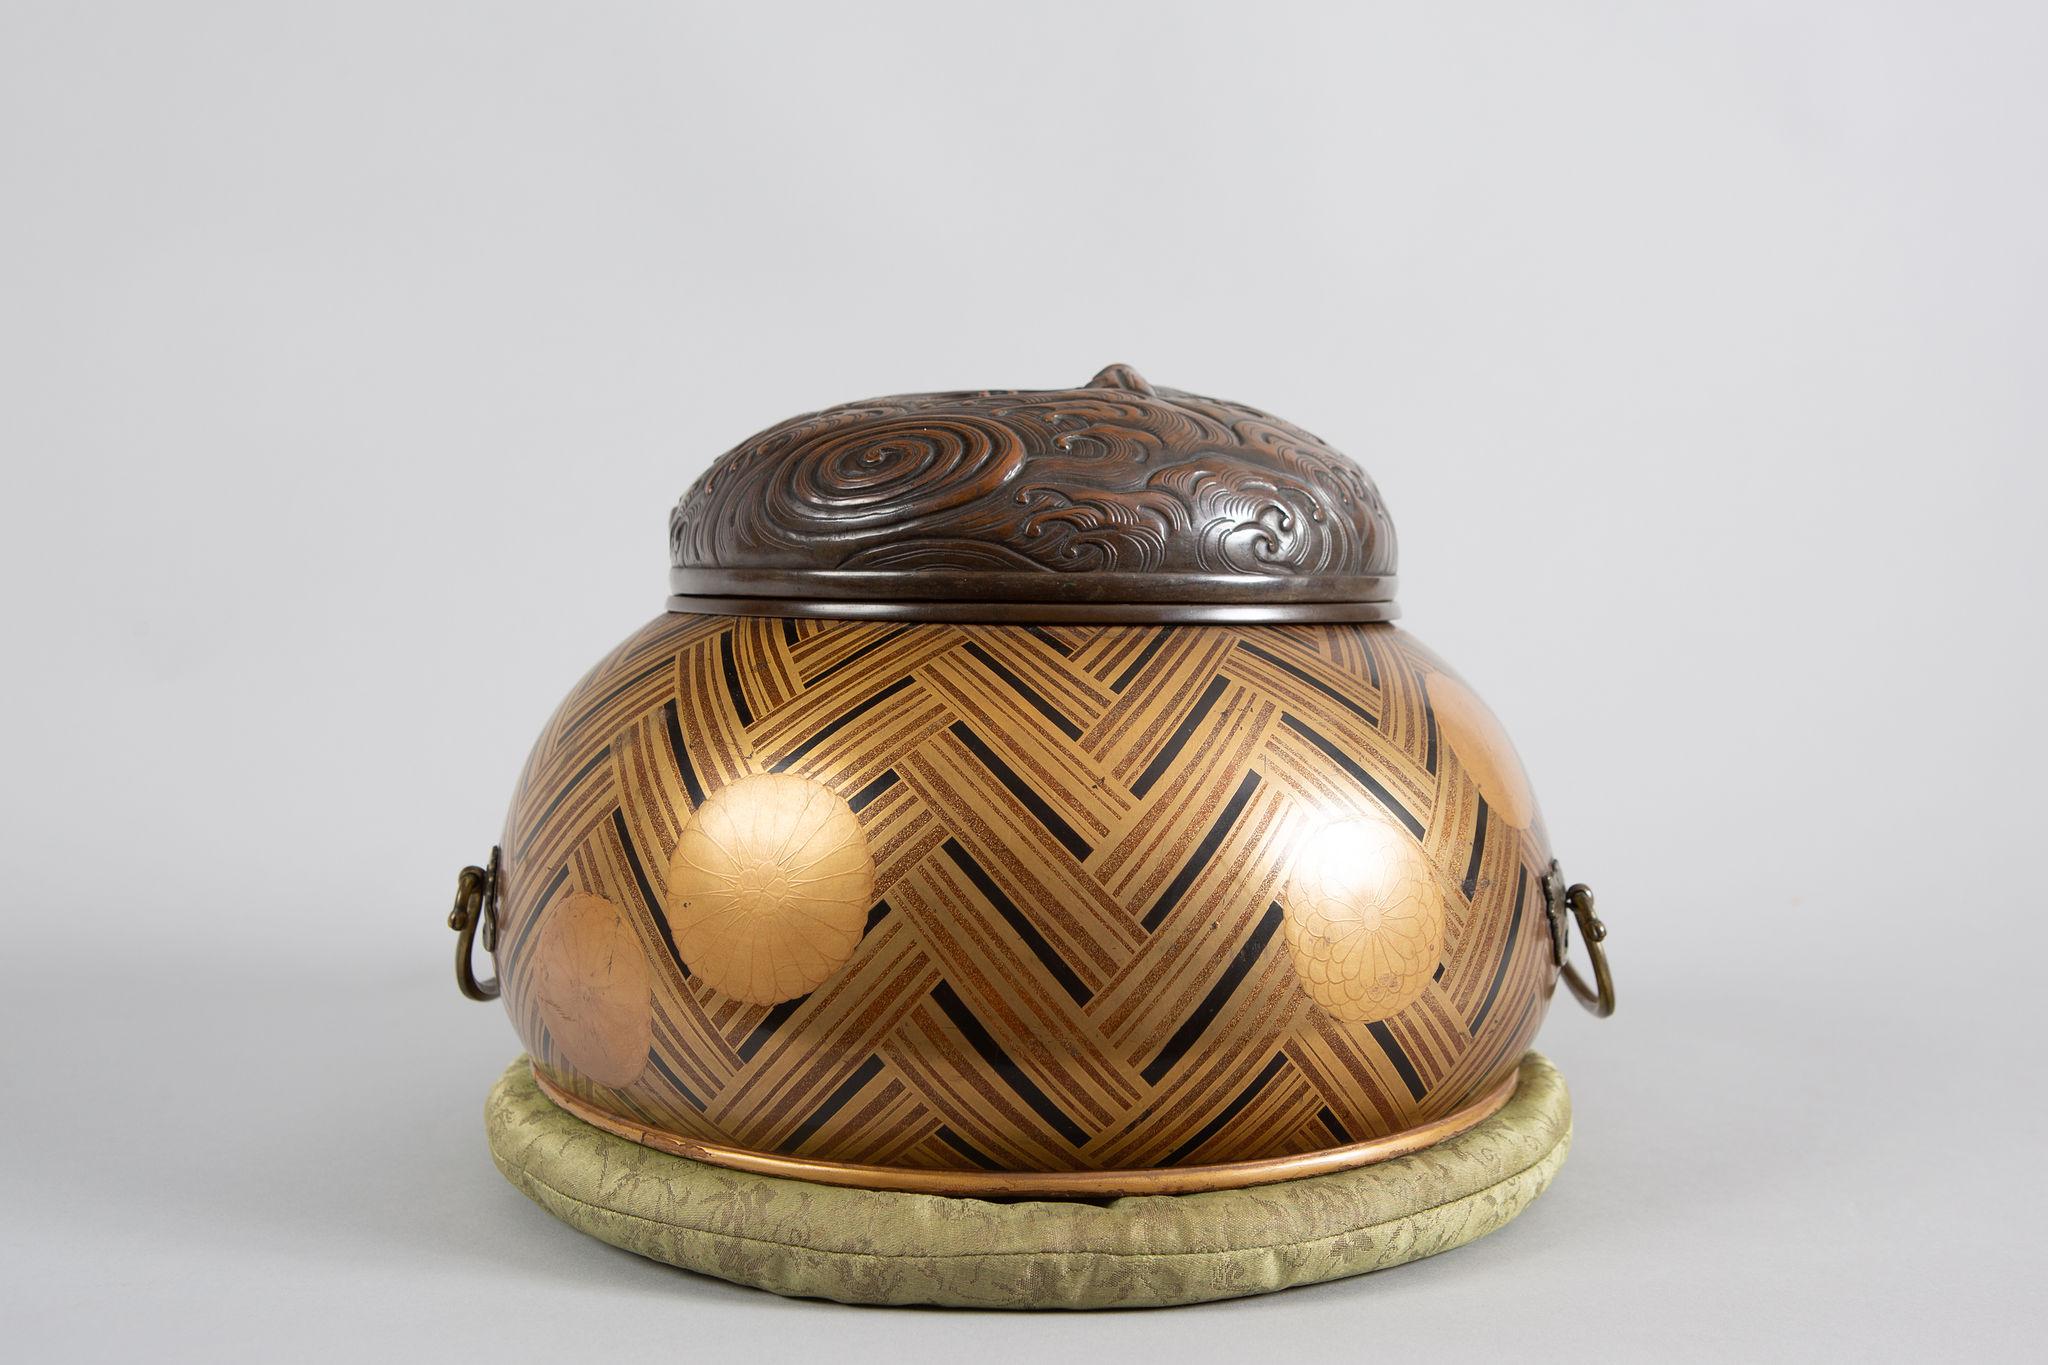 Early 17th century incense burner( Koro) in basket weave nashiji lacquer pattern with chrysanthemum mons (the national symbol of Japan). Copper grill with detailed waves pattern. Footed with mounts. Comes with pillow and original storage box.